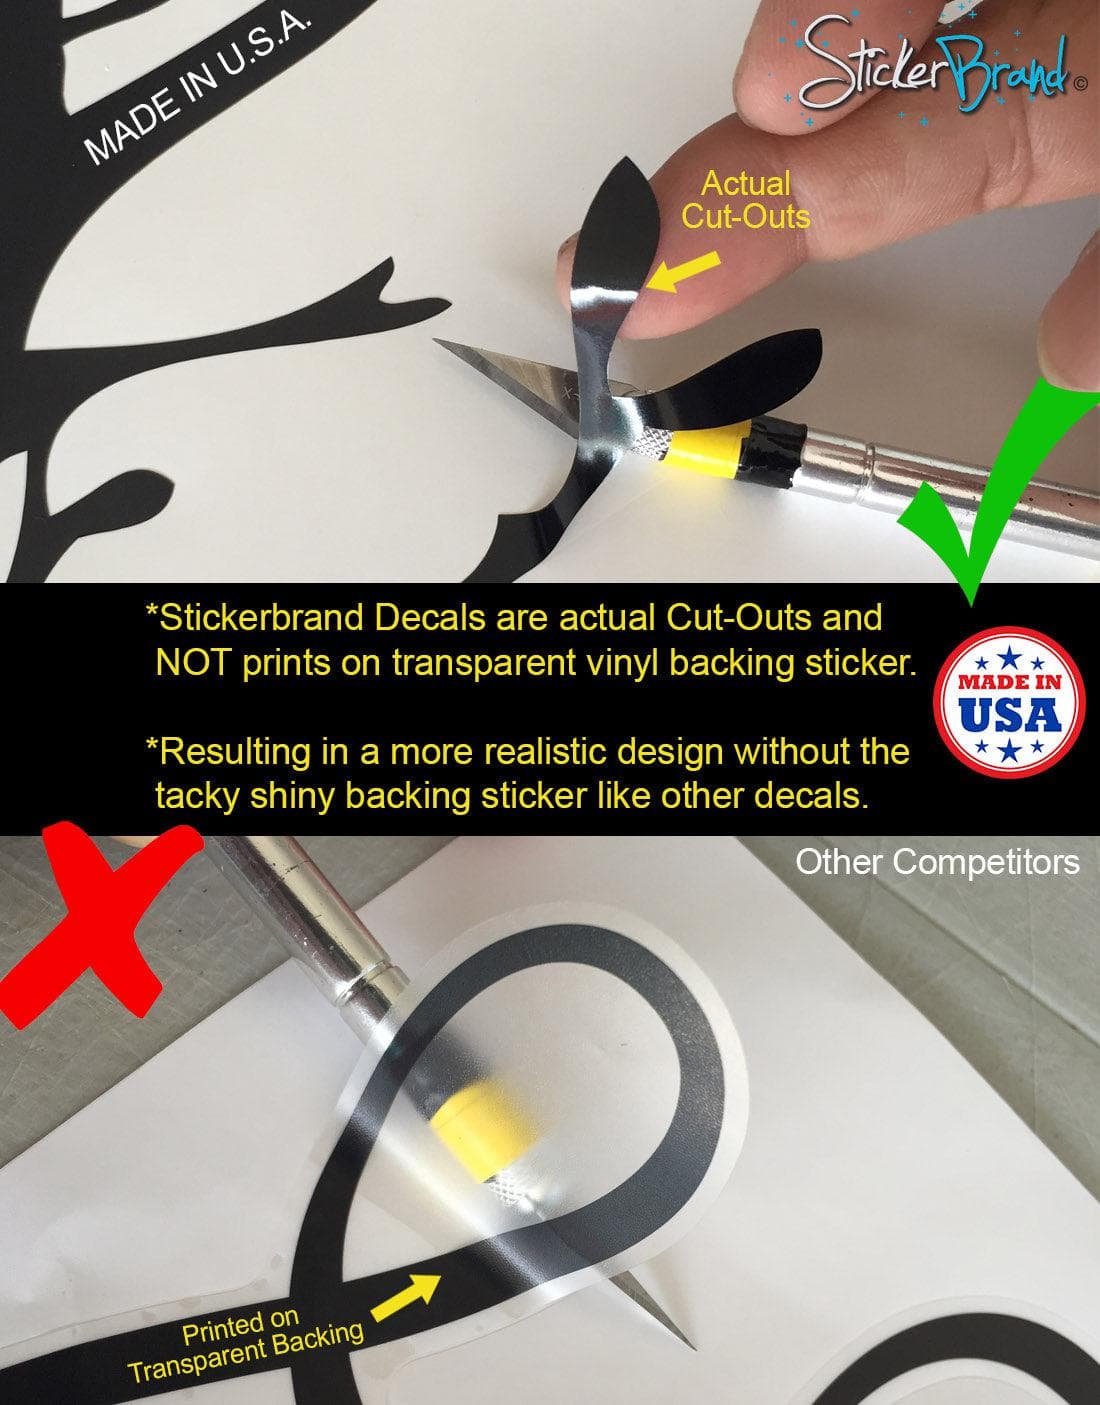 Two images showing a decal being removed from a sticker paper. In the center is a black rectangular box with a yellow text: "StickerBrand Decals are actual Cut-Outs and NOT prints on transparent vinyl backing sticker. Resulting in a more realistic design without the tacky shiny backing sticker like other decals."